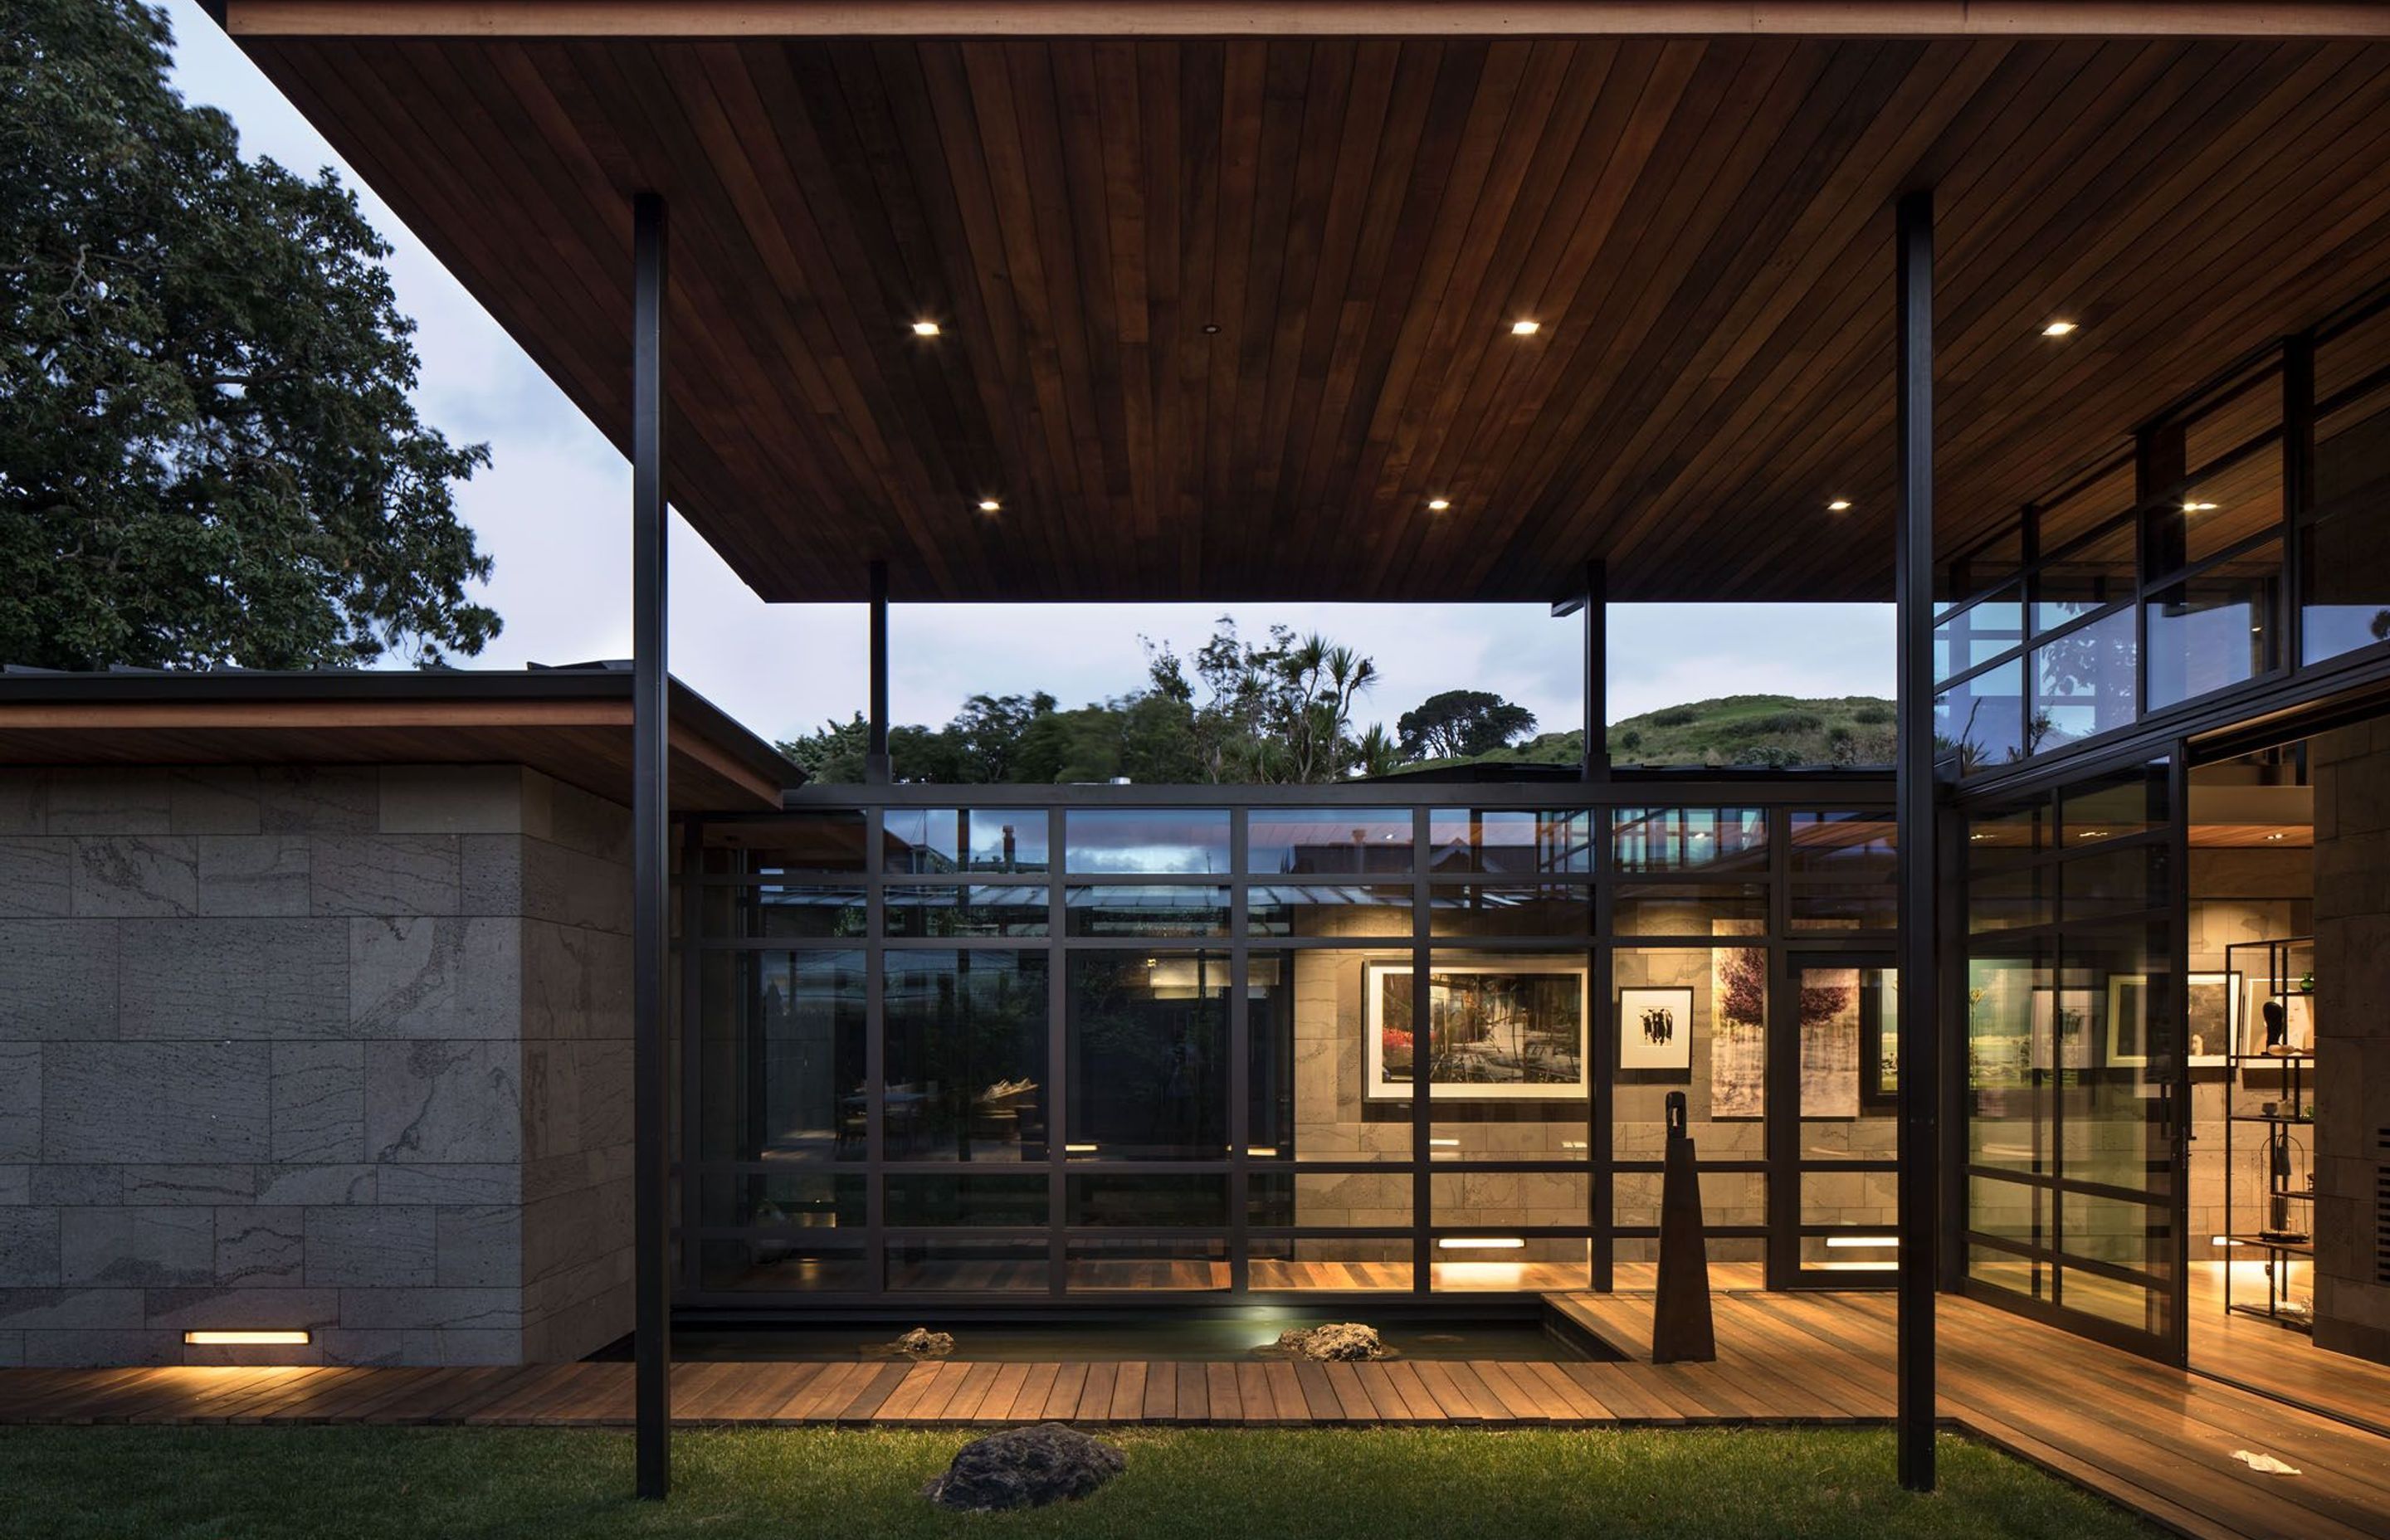 The roof is a protective element that possesses an incredible lightness. Sitting high and free of the structure, it appears to almost float over the glazed windows and doors.